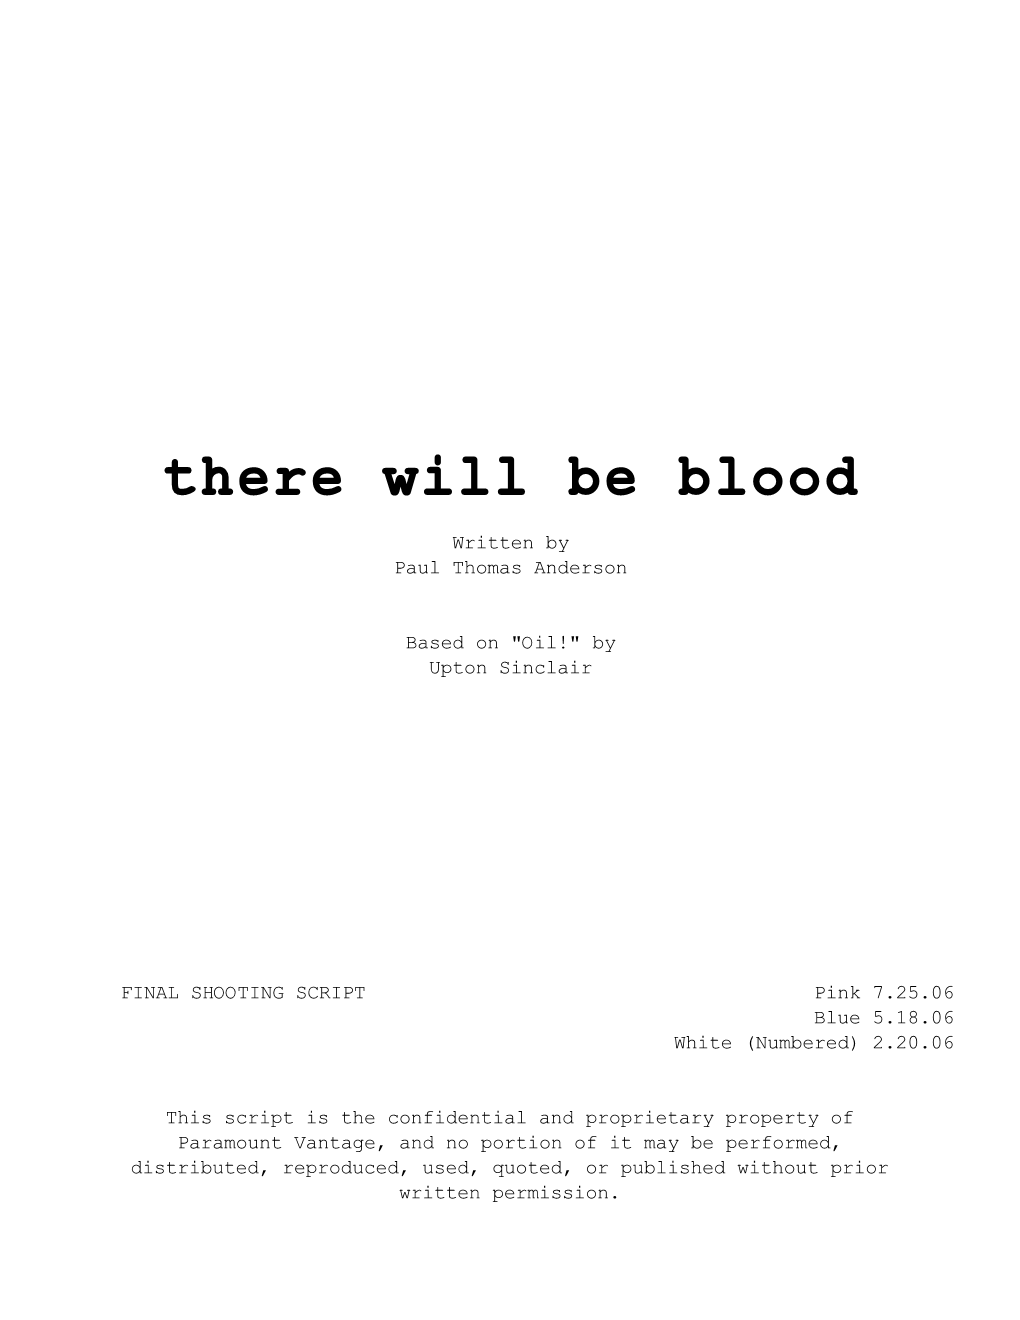 There Will Be Blood (2007) Screenplay [Final Shooting Script